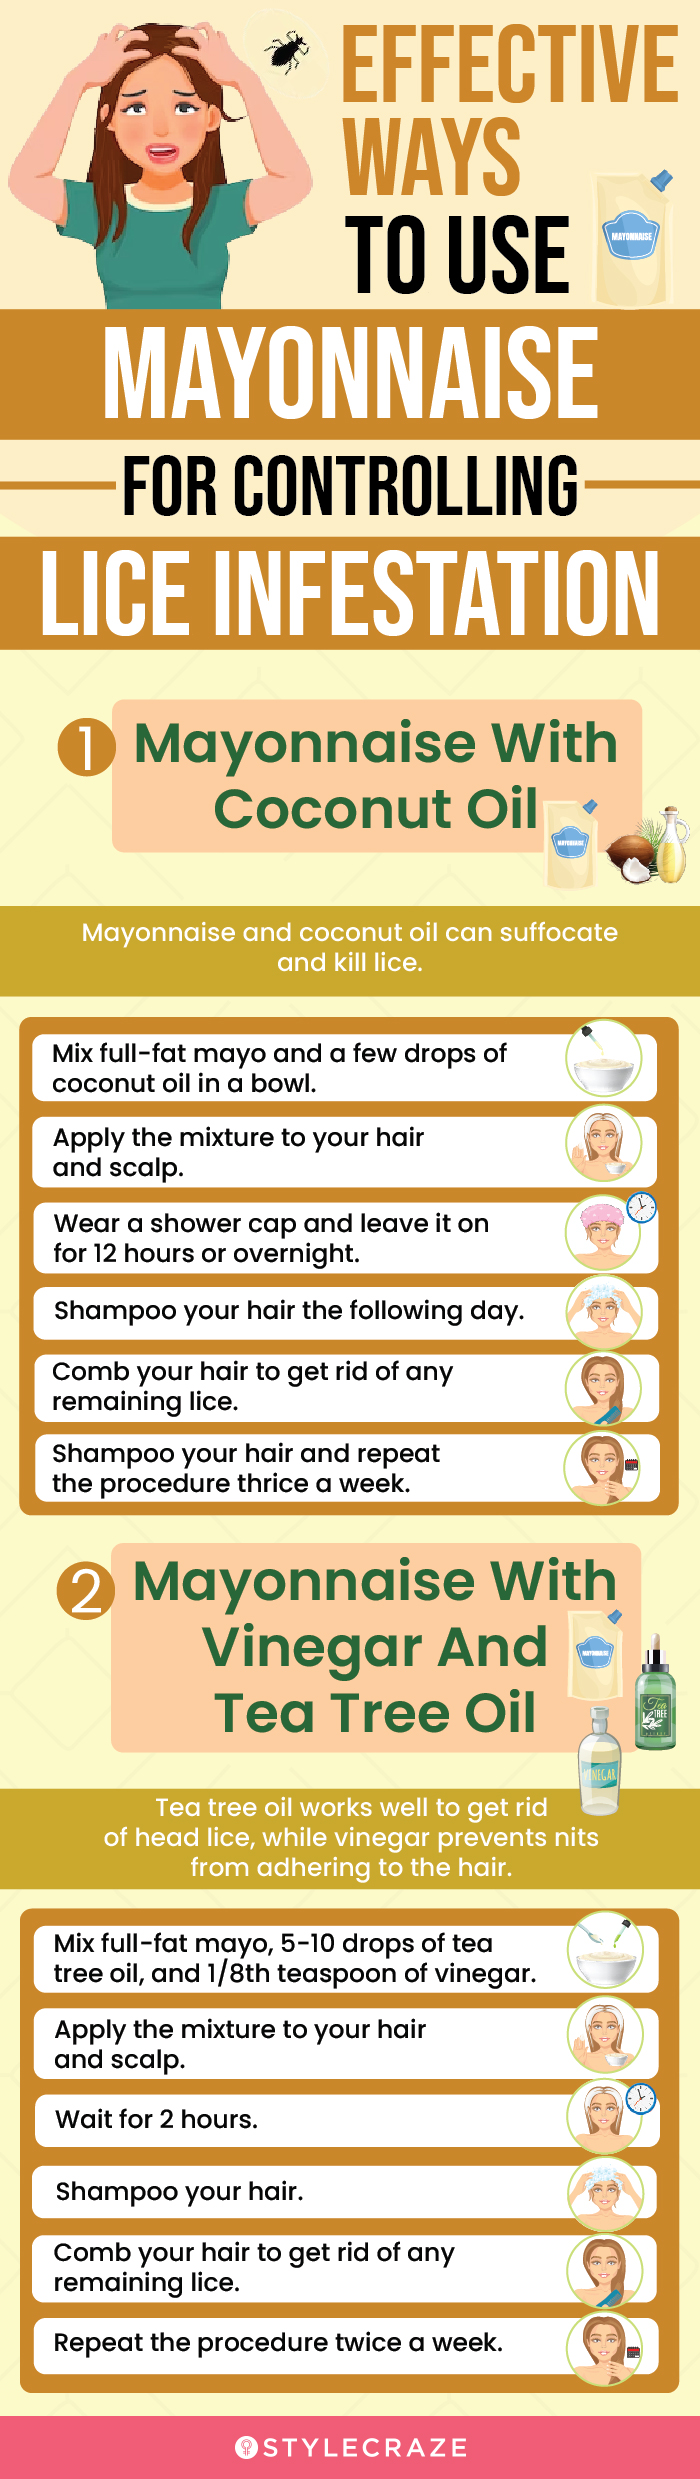 effective ways to use mayonnaise for controlling lice infestation (infographic)